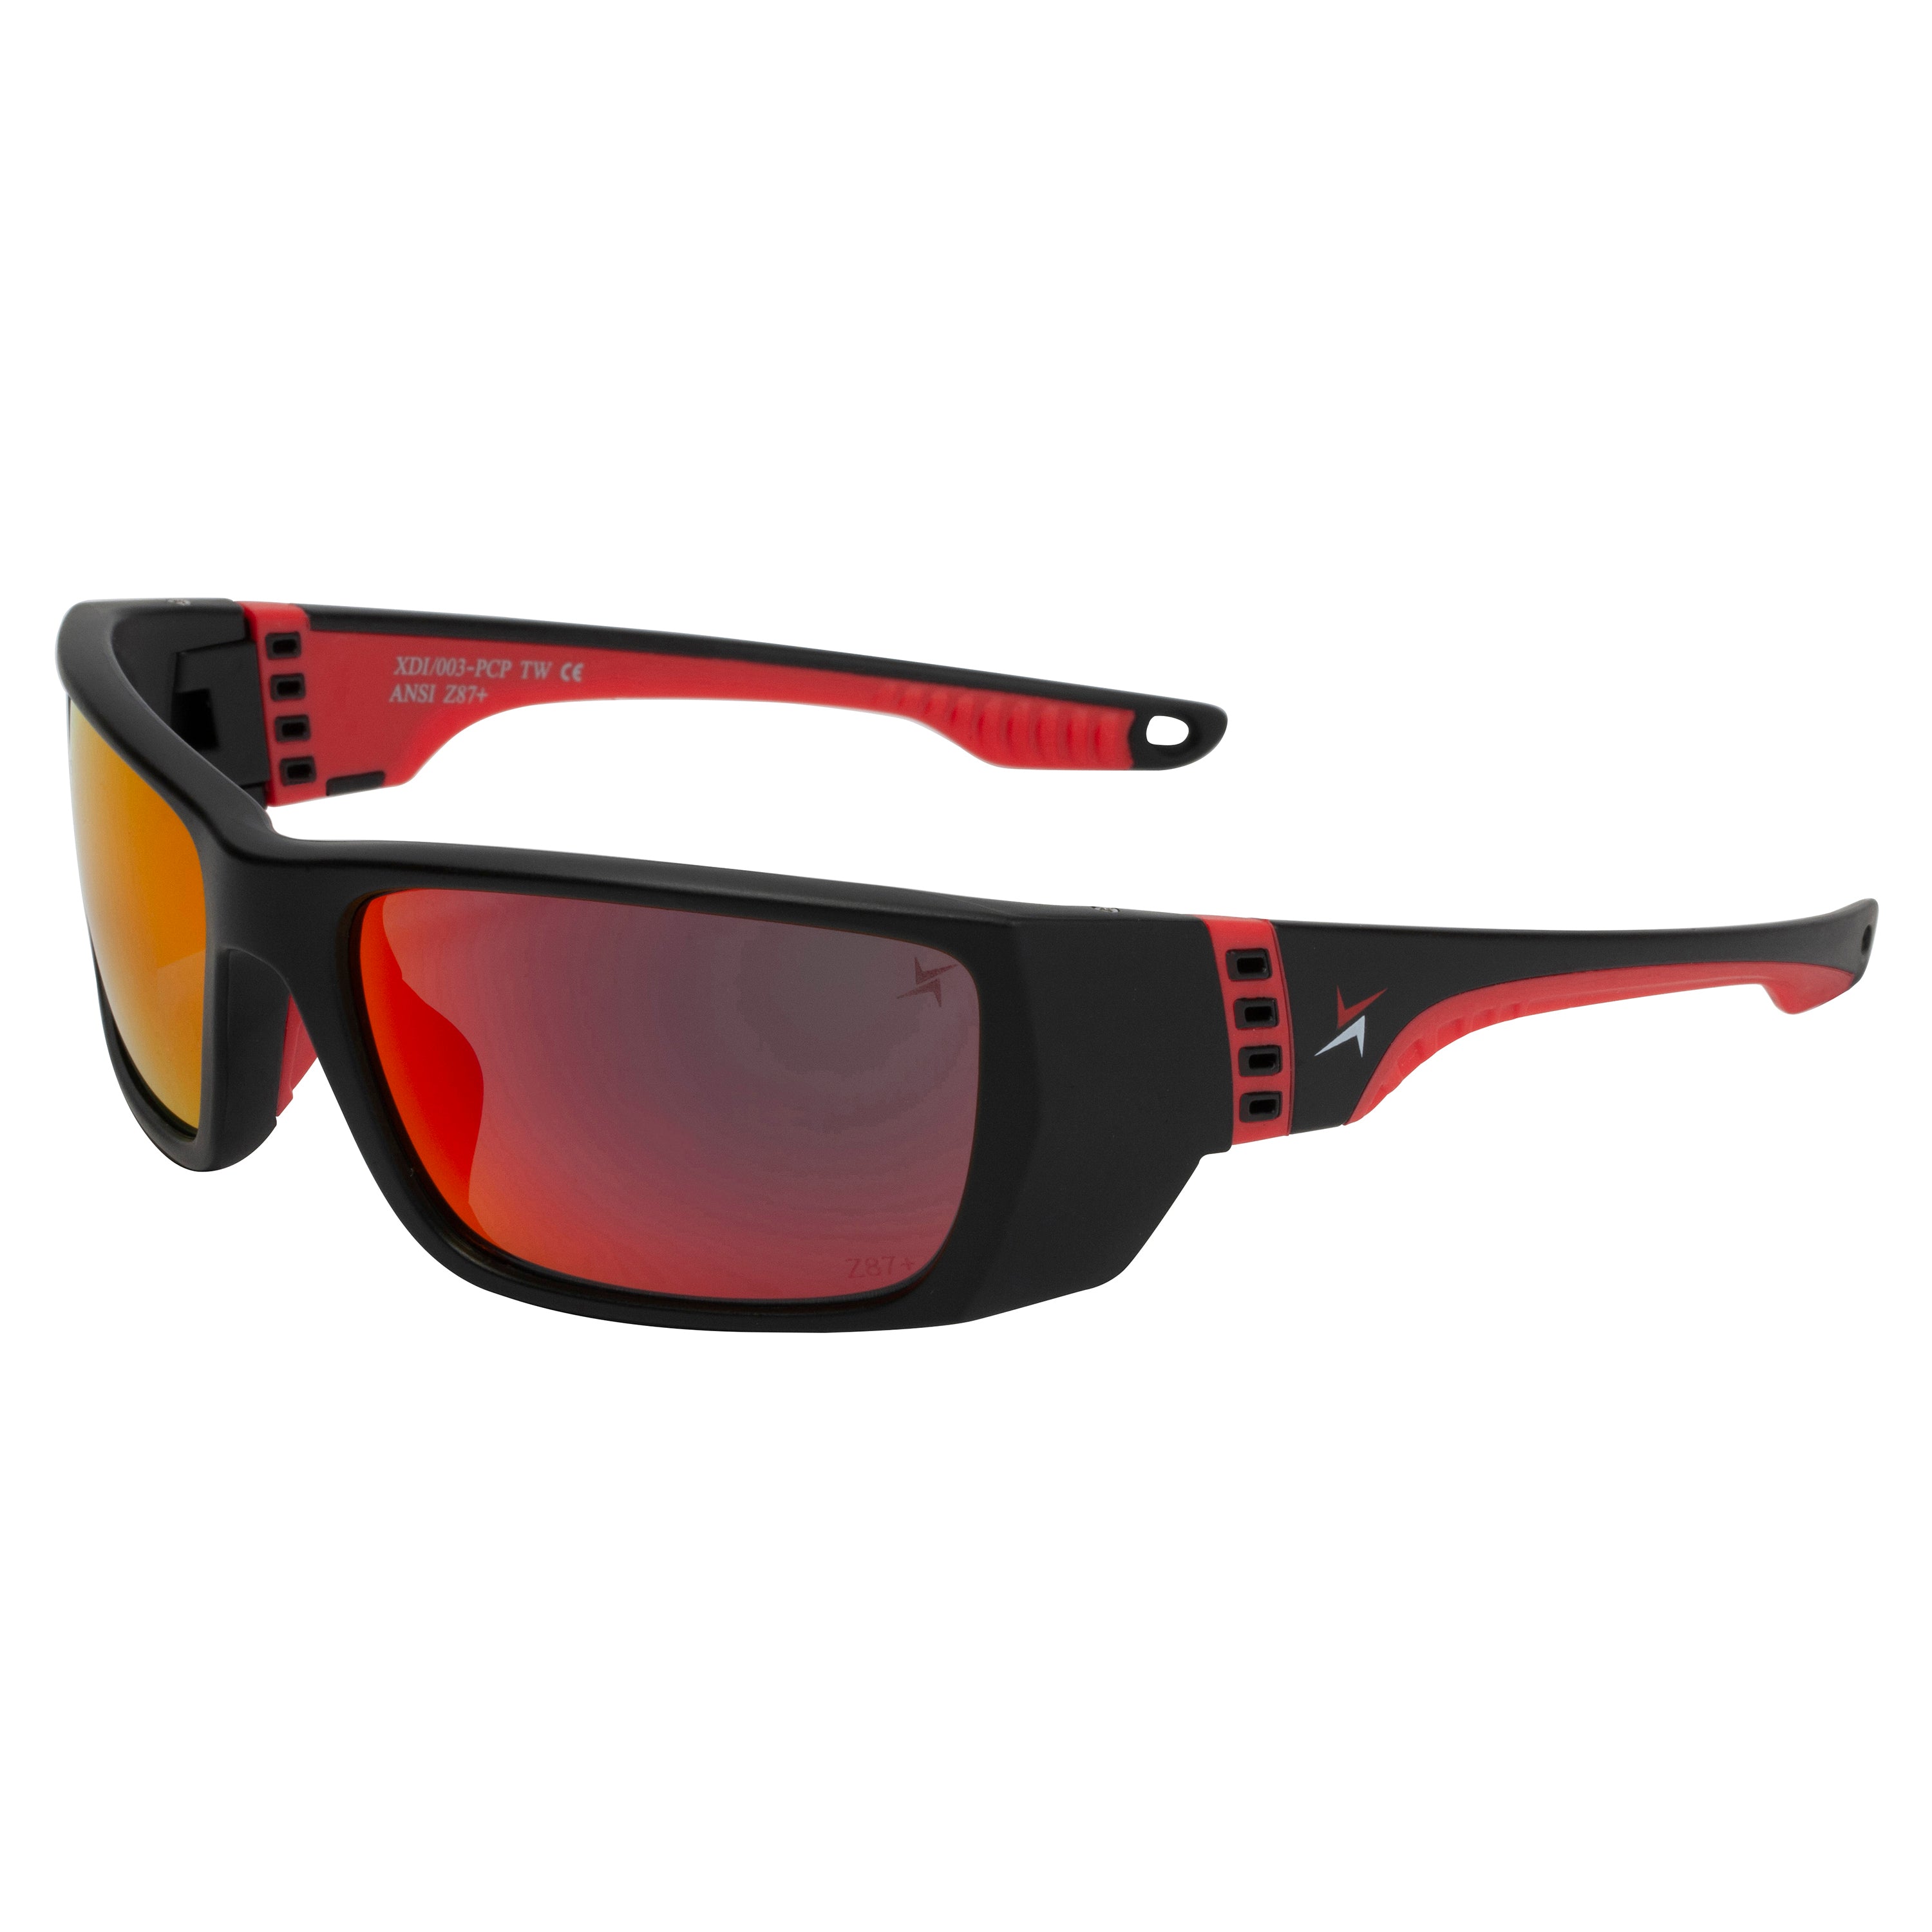 Polycarbonate Polarized Red Mirror Lens Sport Safety Sunglasses with Red Rubber Accents.